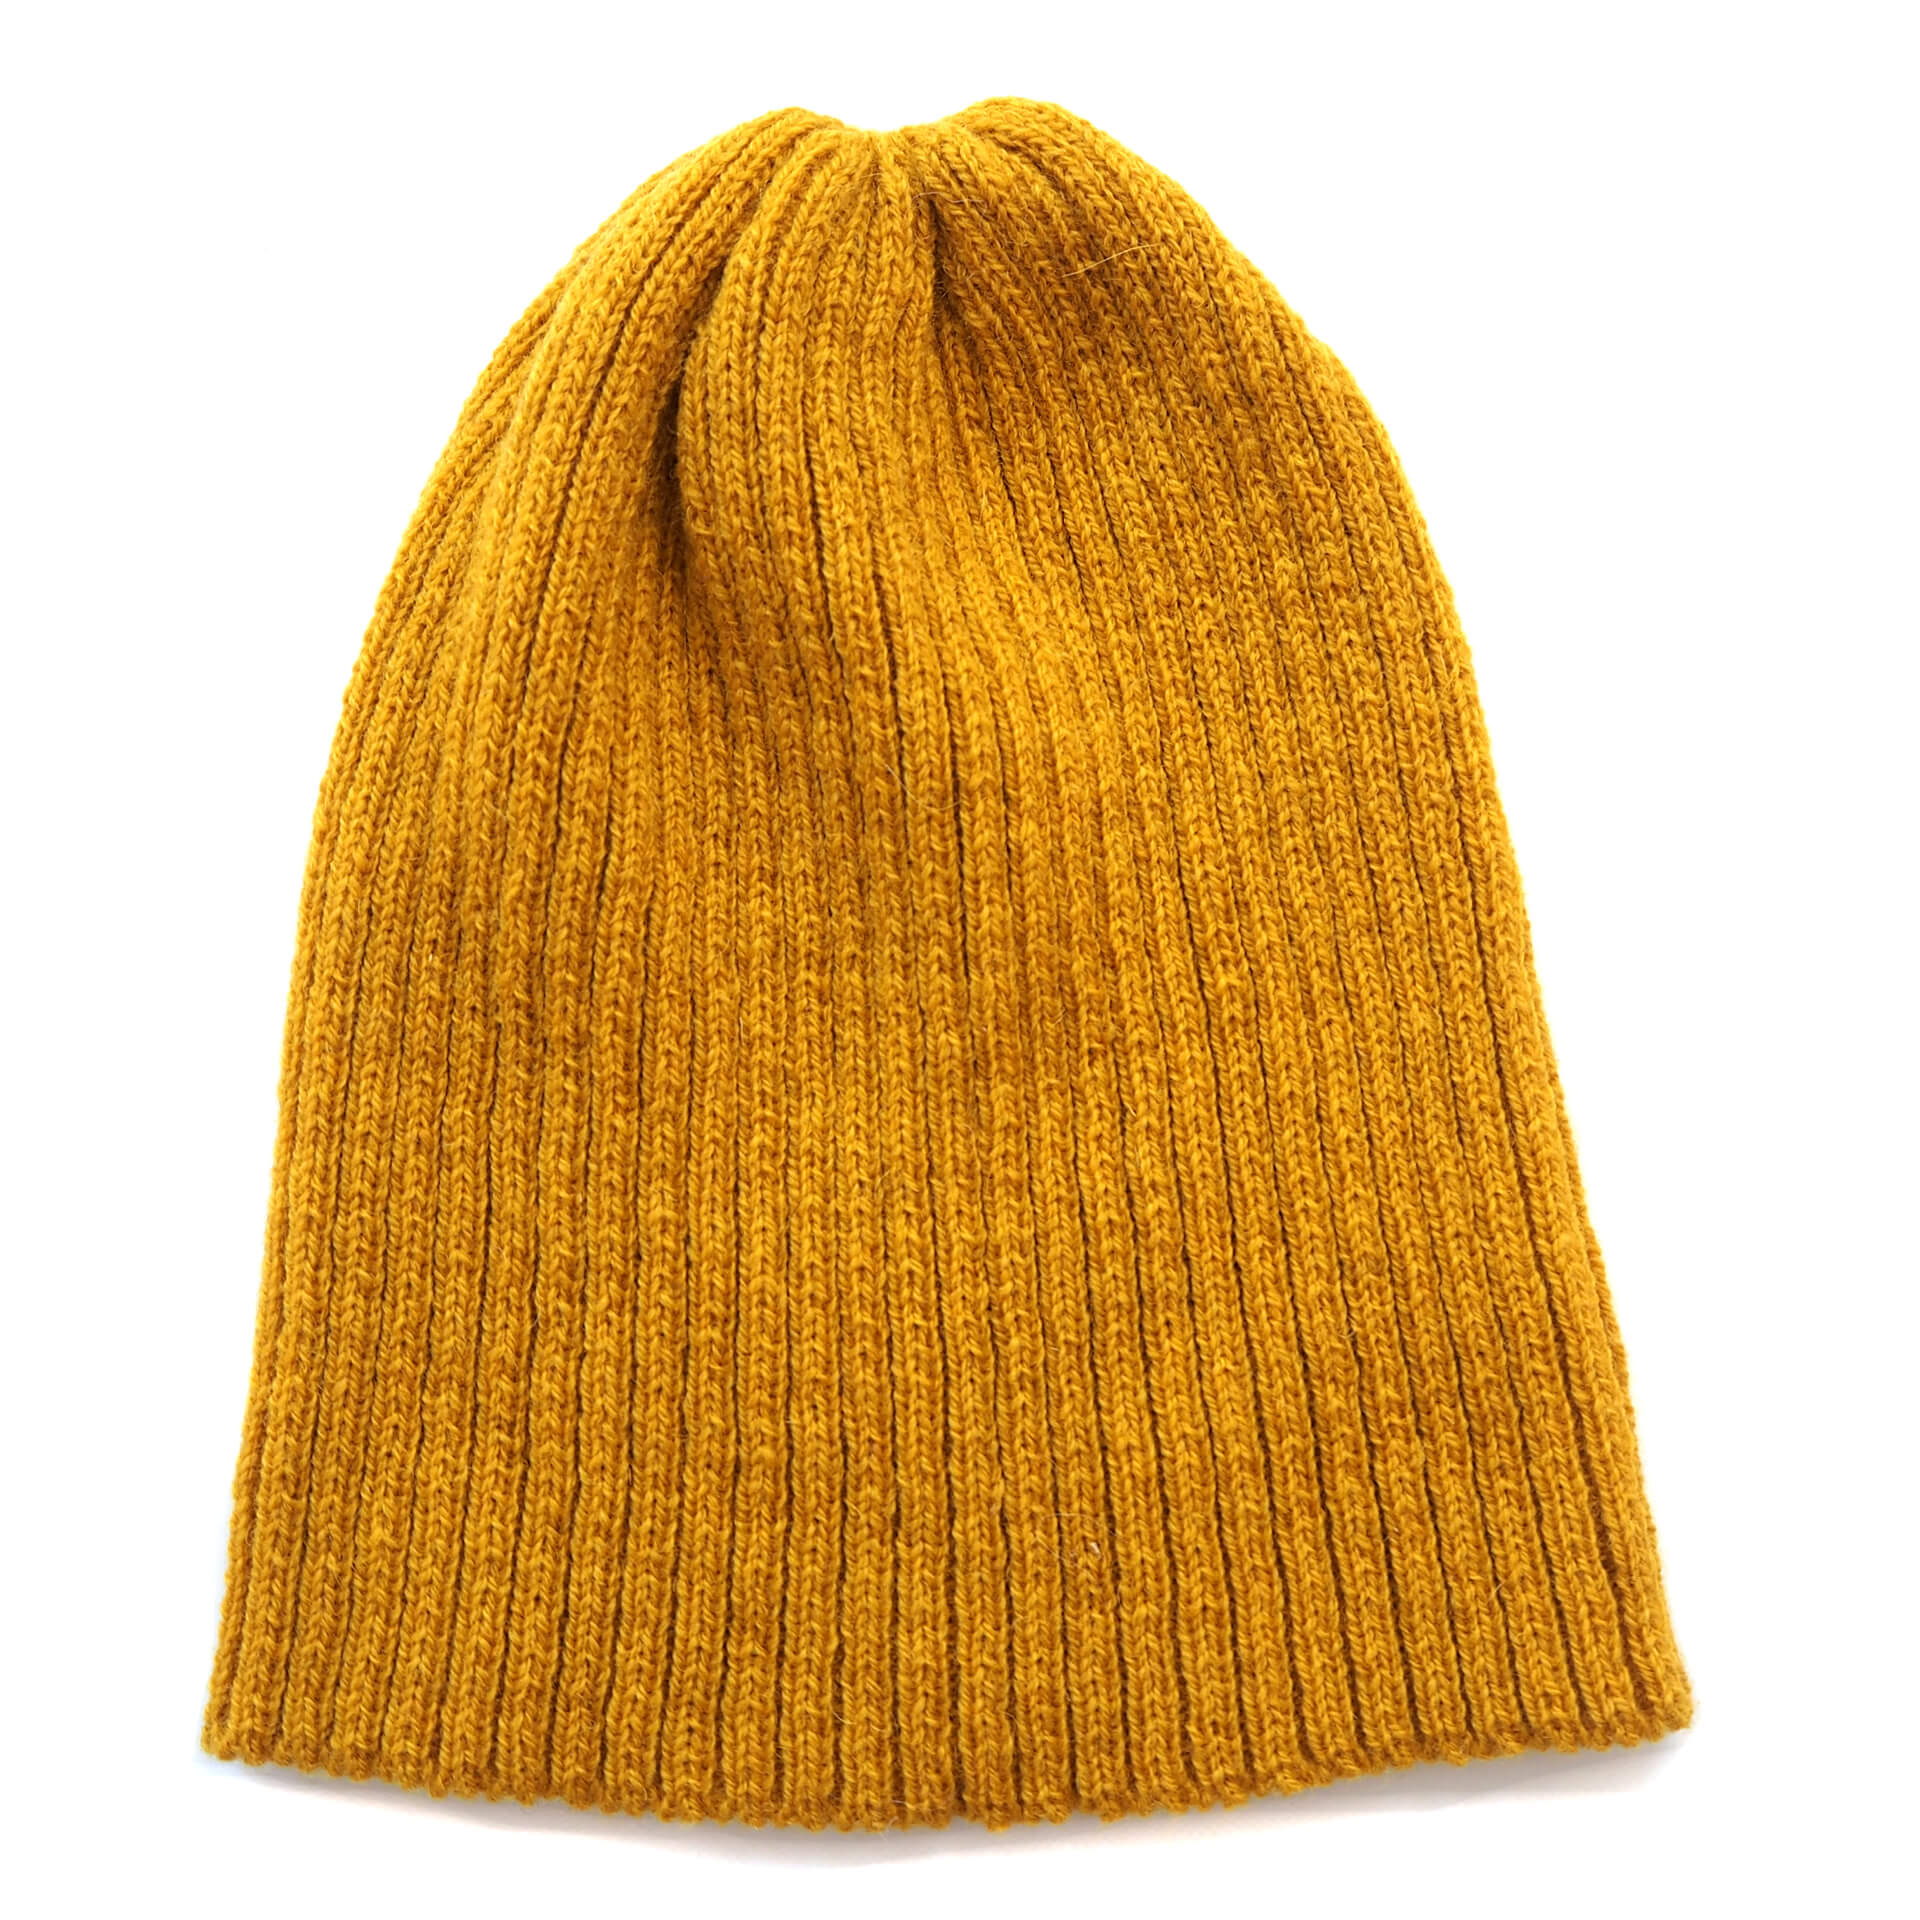 A yellow ribbed beanie without a folded brim by K.Moods. It is on a white background.